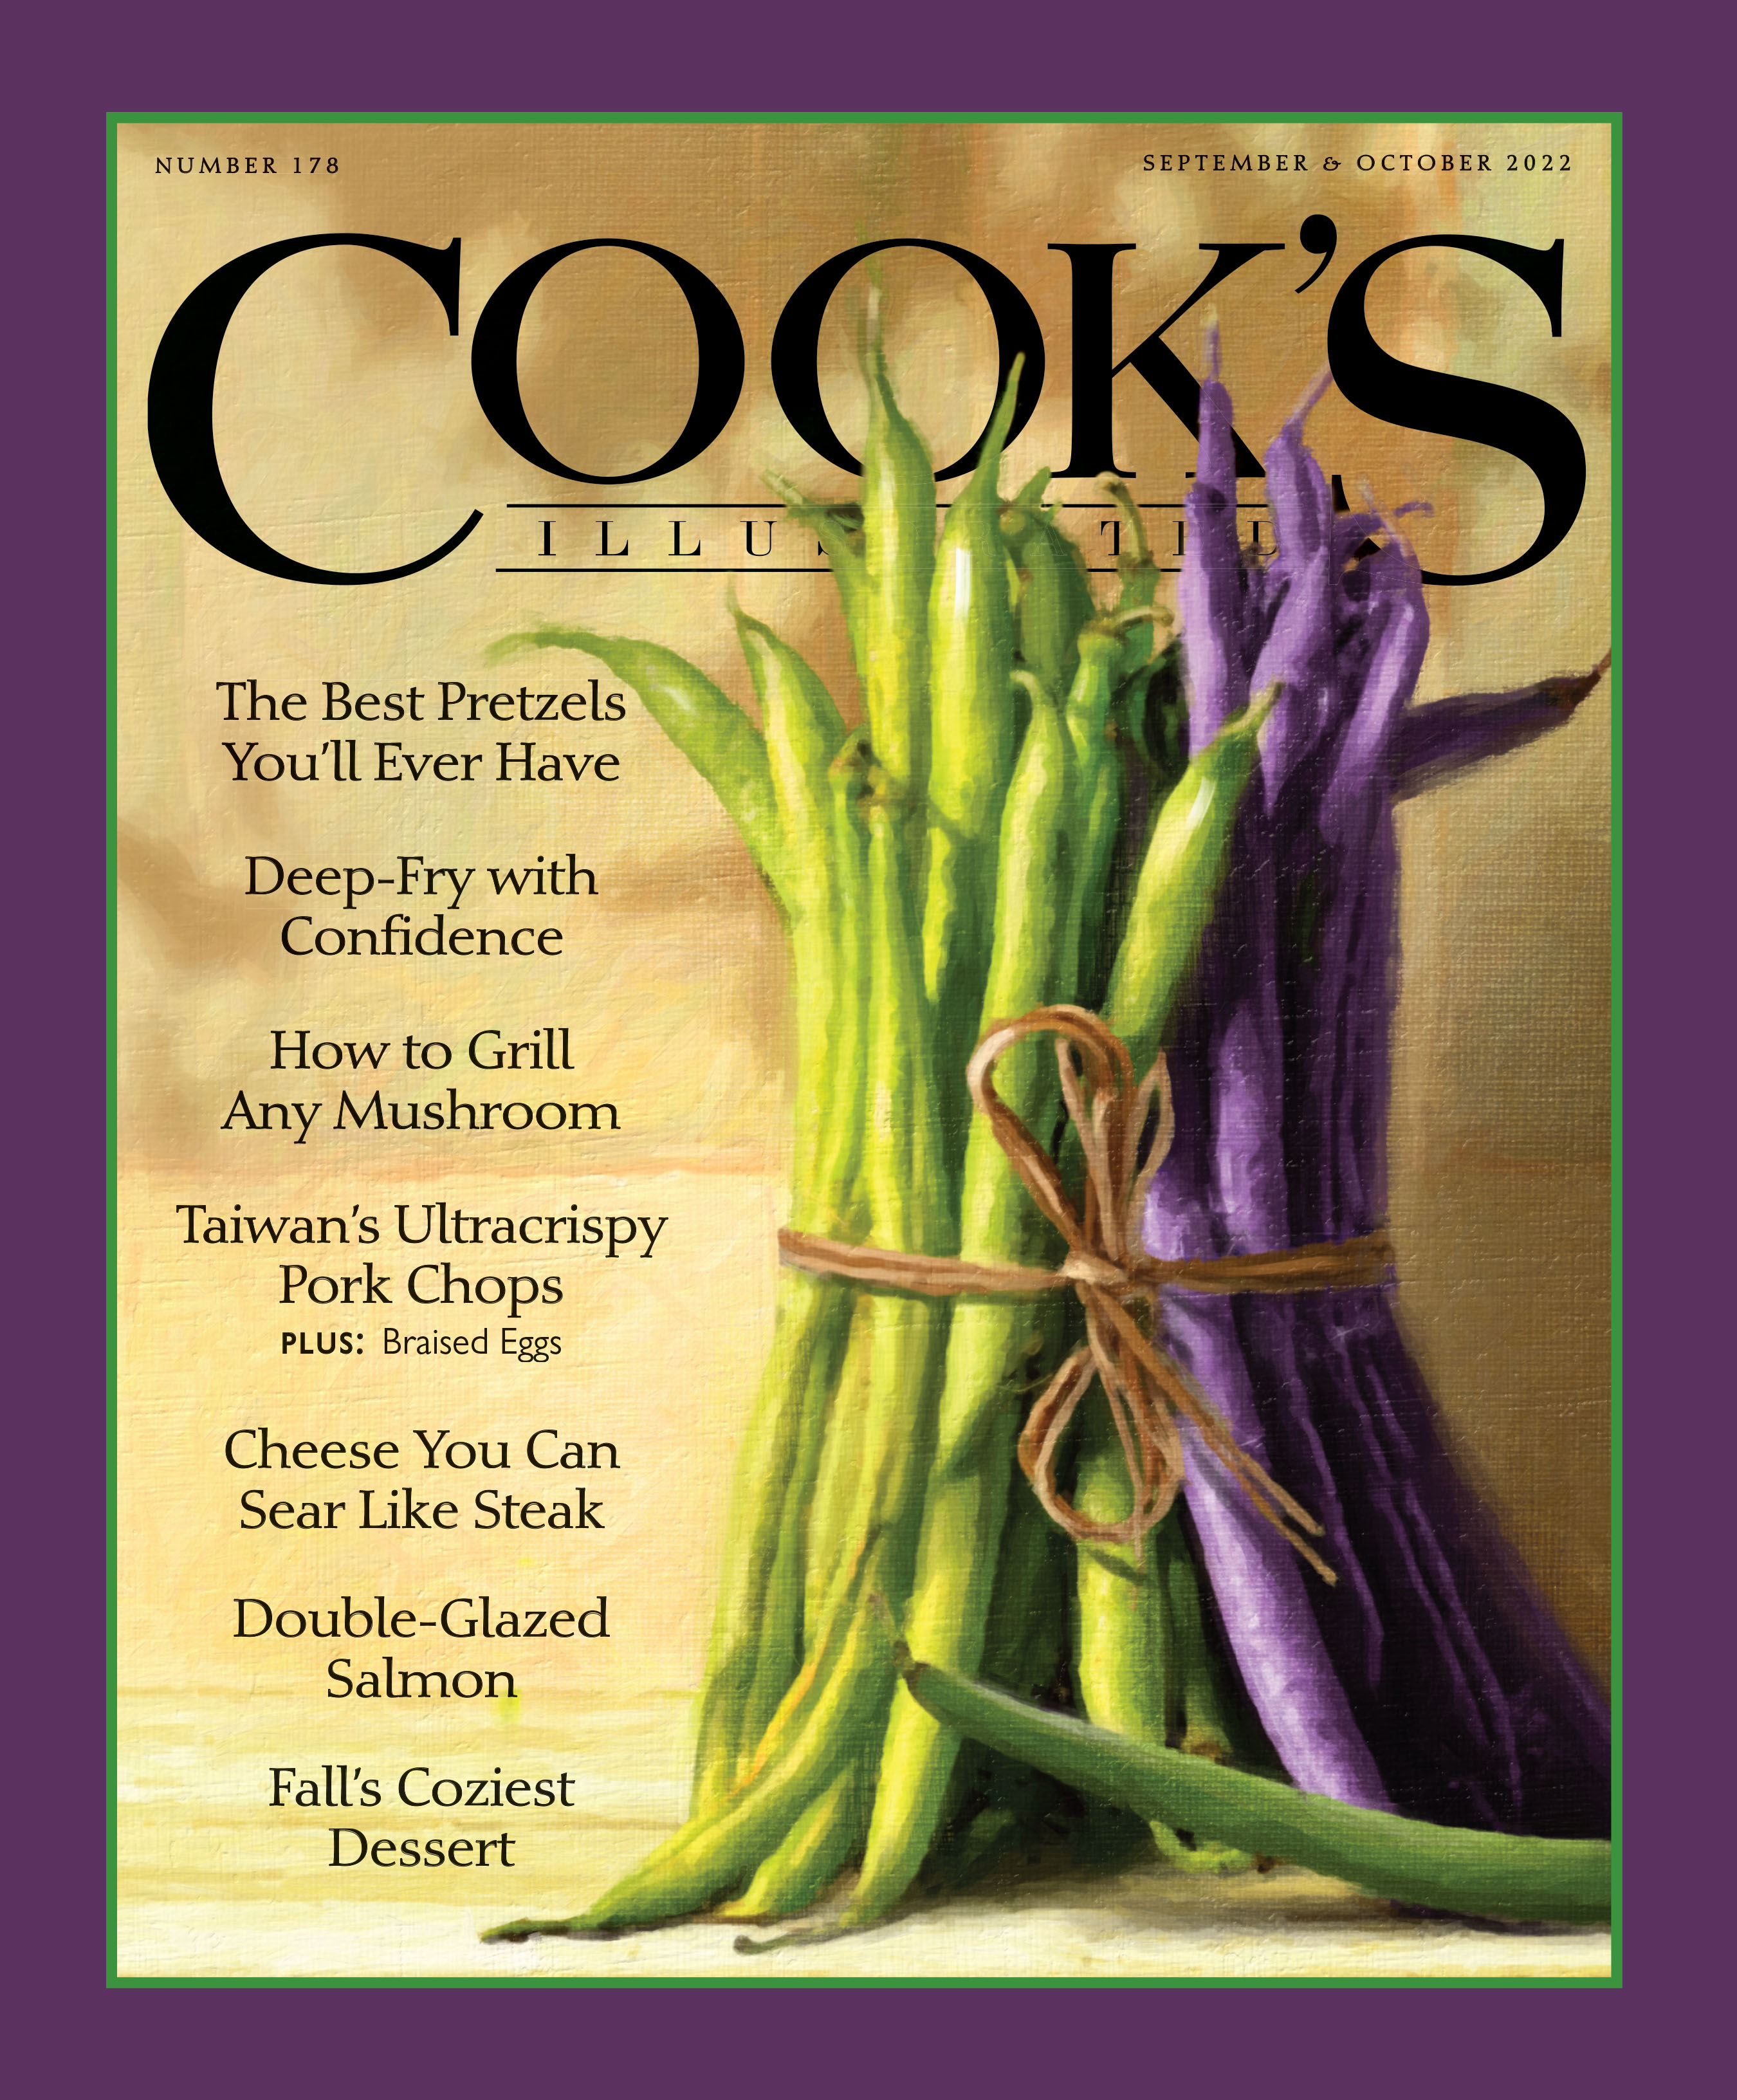 Cook's Illustrated - General Excellence, Service and Lifestyle